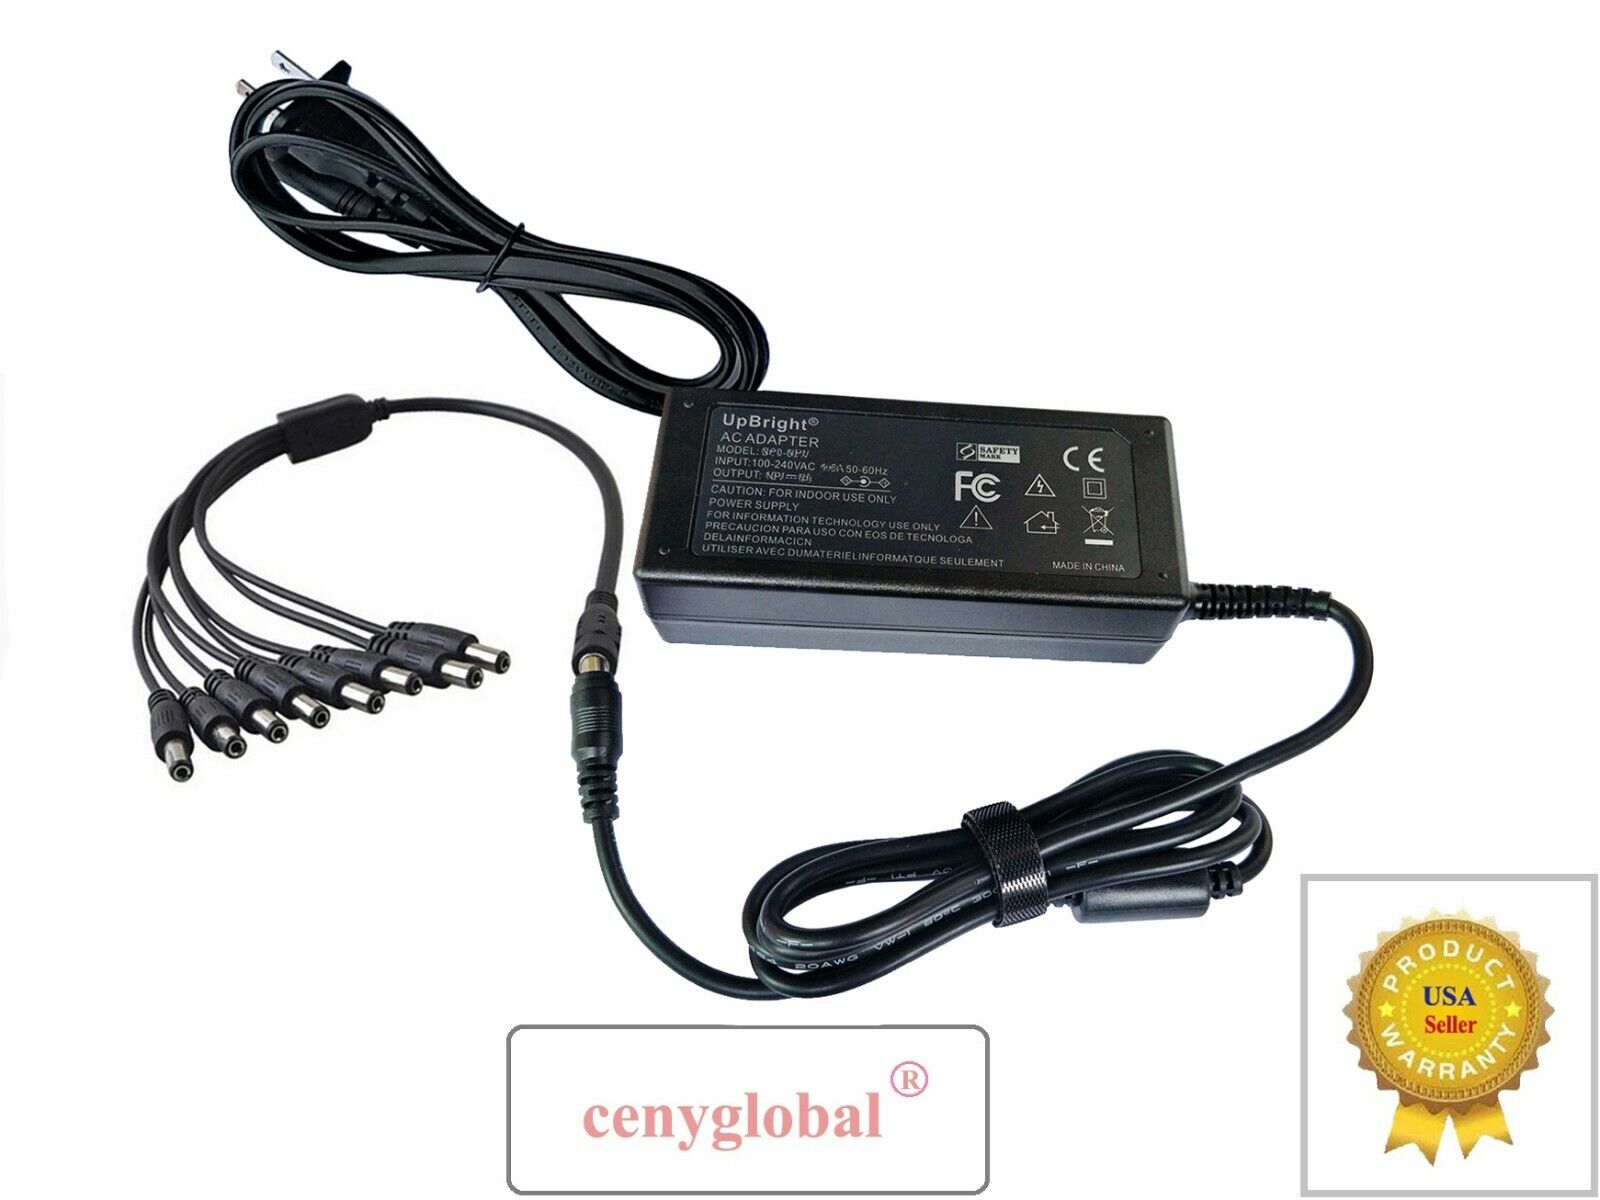 12V 6A AC Adapter + 1 to 8 Power Splitter Cable For CCTV Surveillance Camera DVR